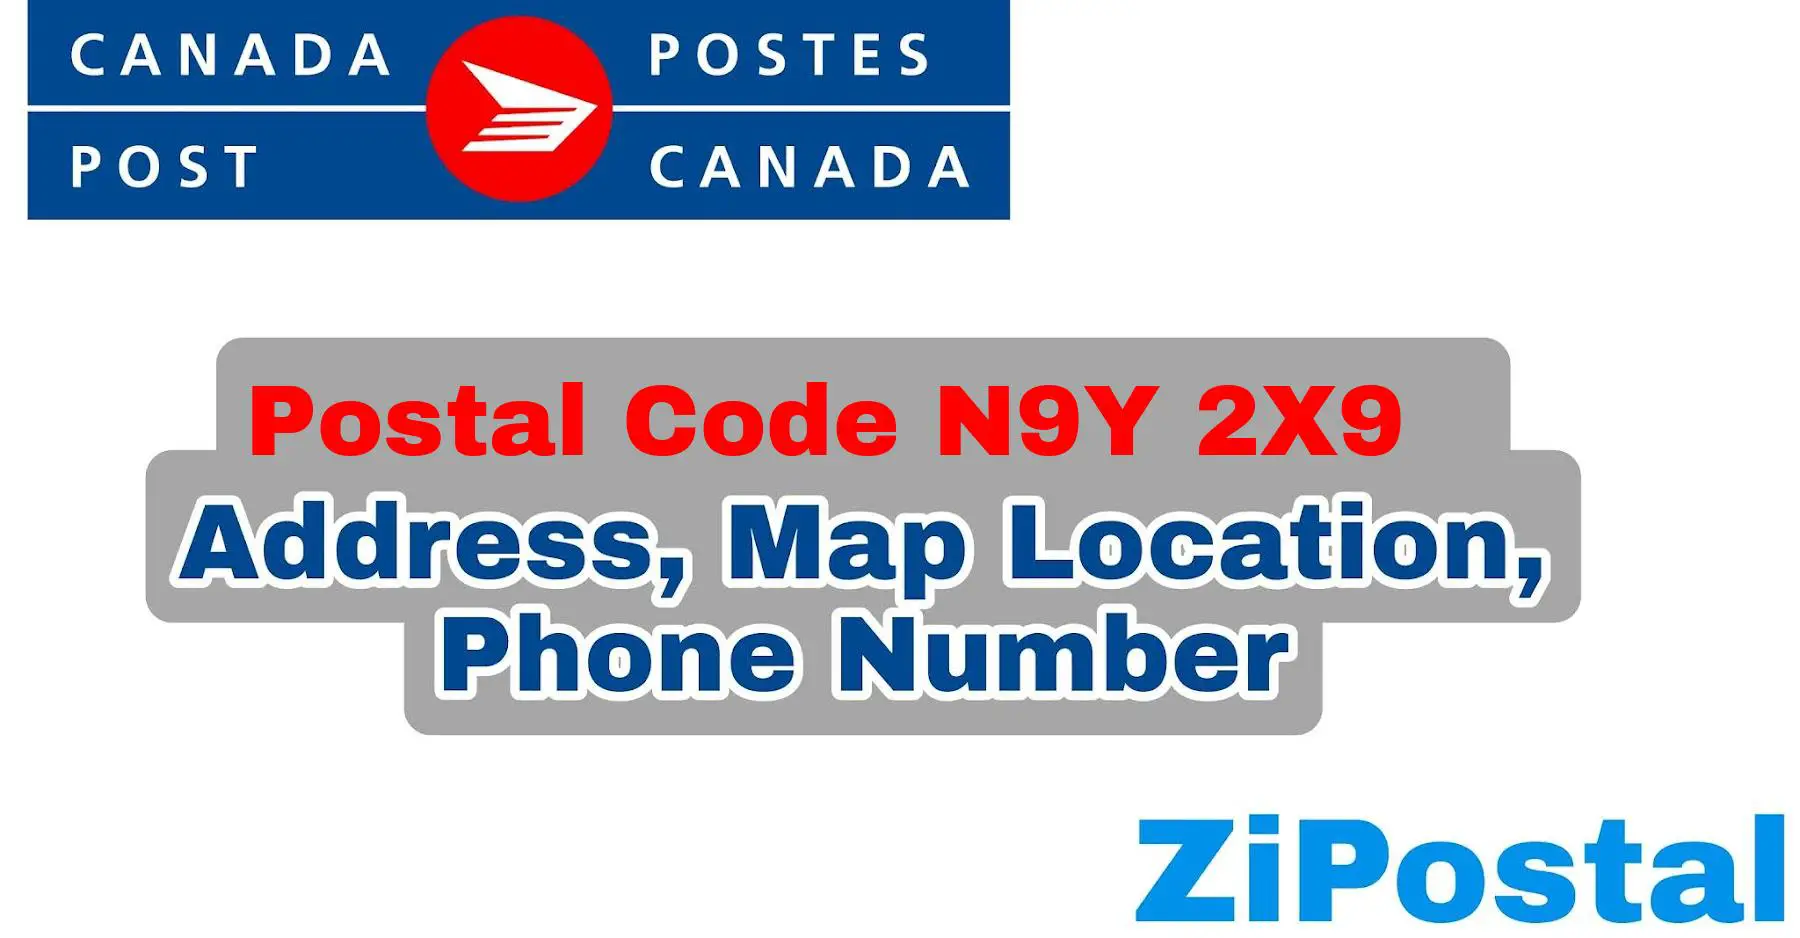 Postal Code N9Y 2X9 Address Map Location and Phone Number